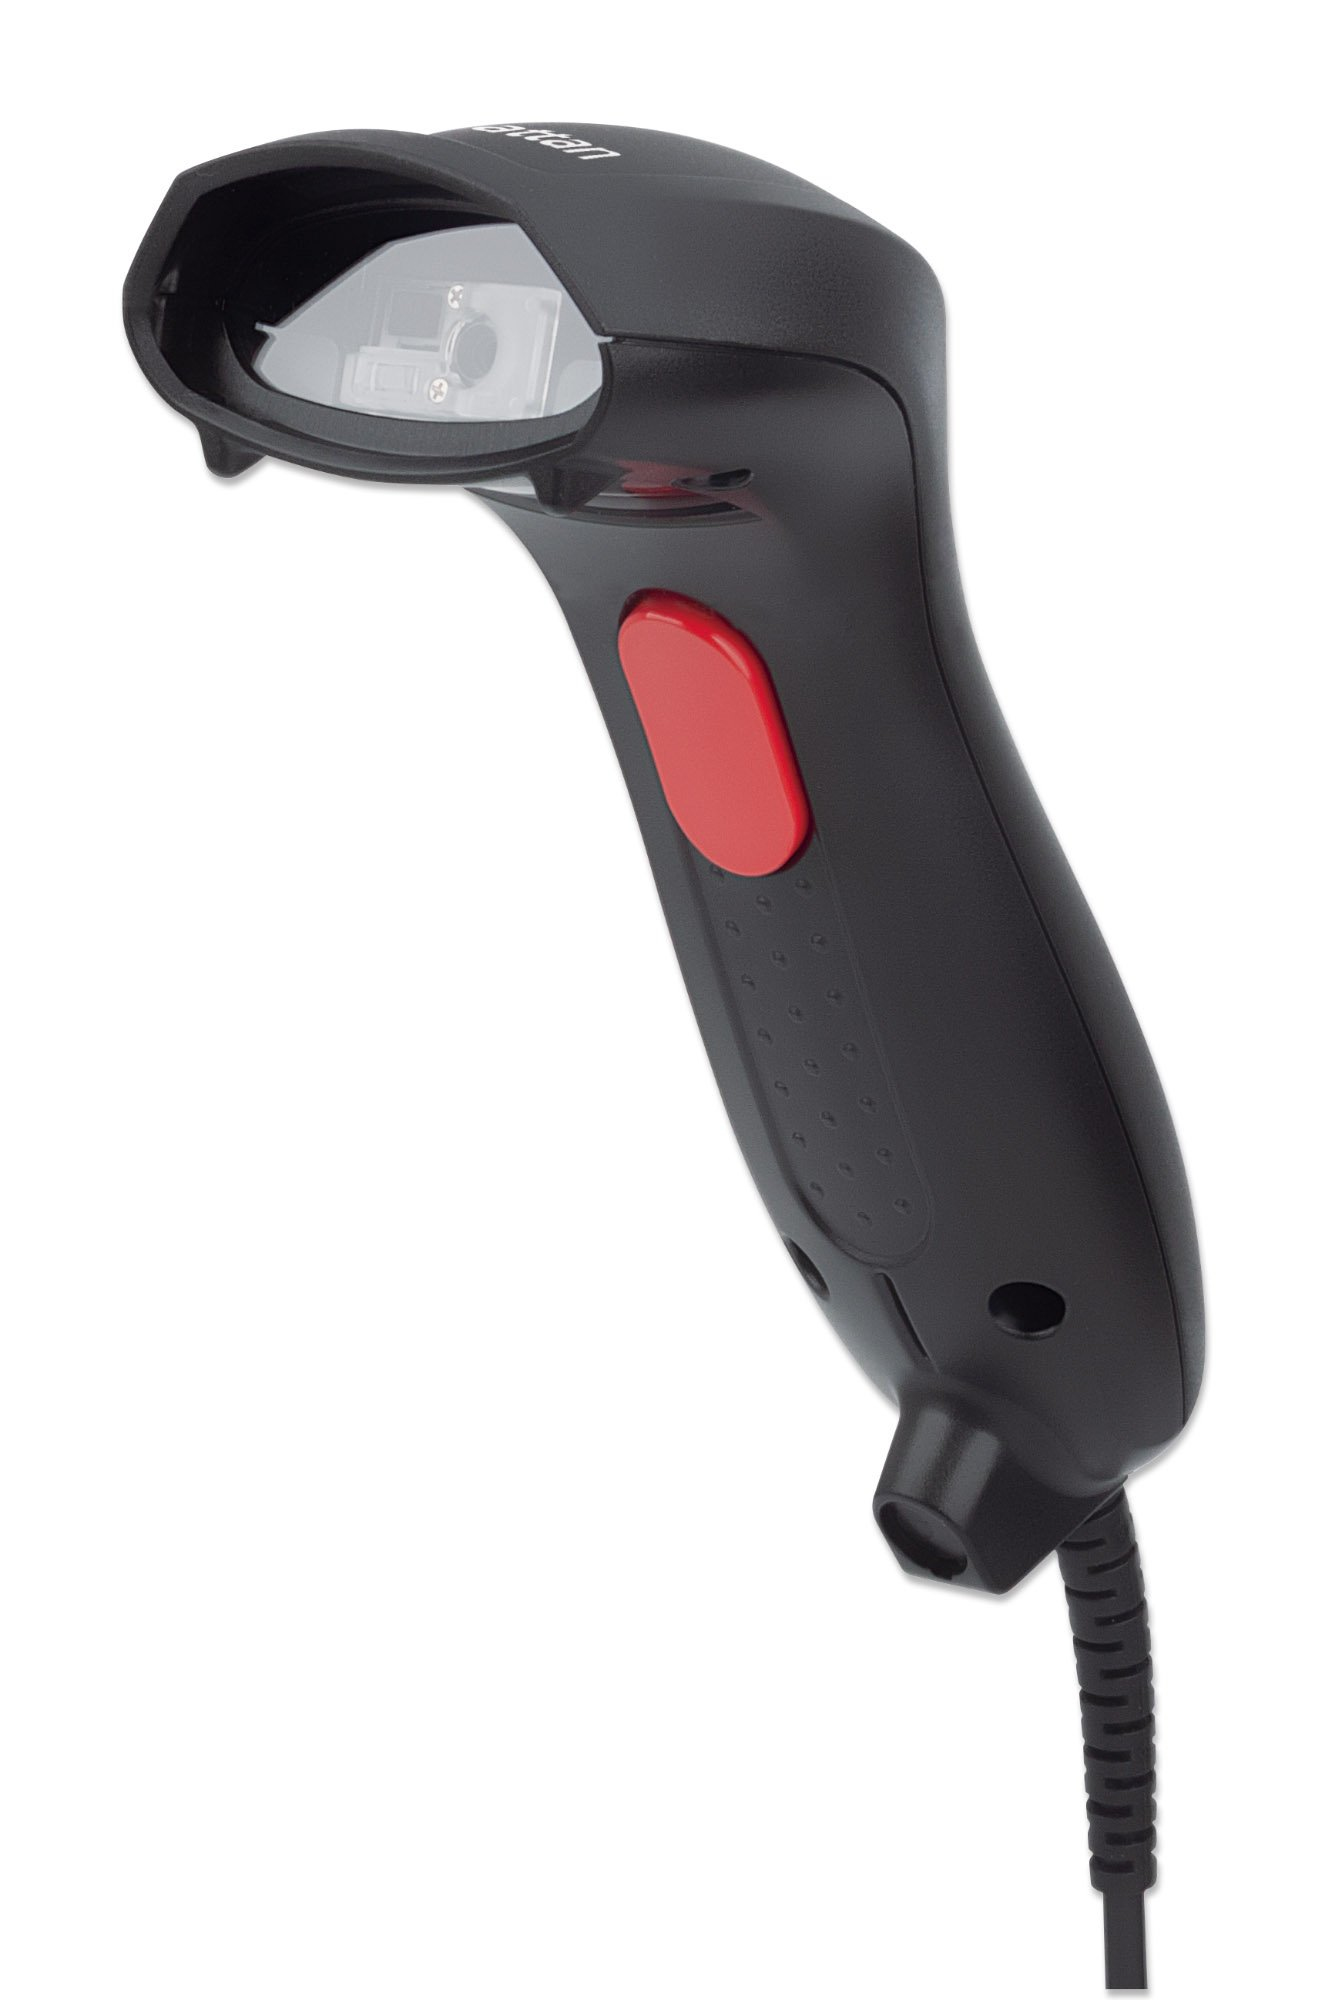 Manhattan 2D Handheld Barcode Scanner, USB-A, 250mm Scan Depth, Cable 1.5m, Max Ambient Light 100,000 lux (sunlight)